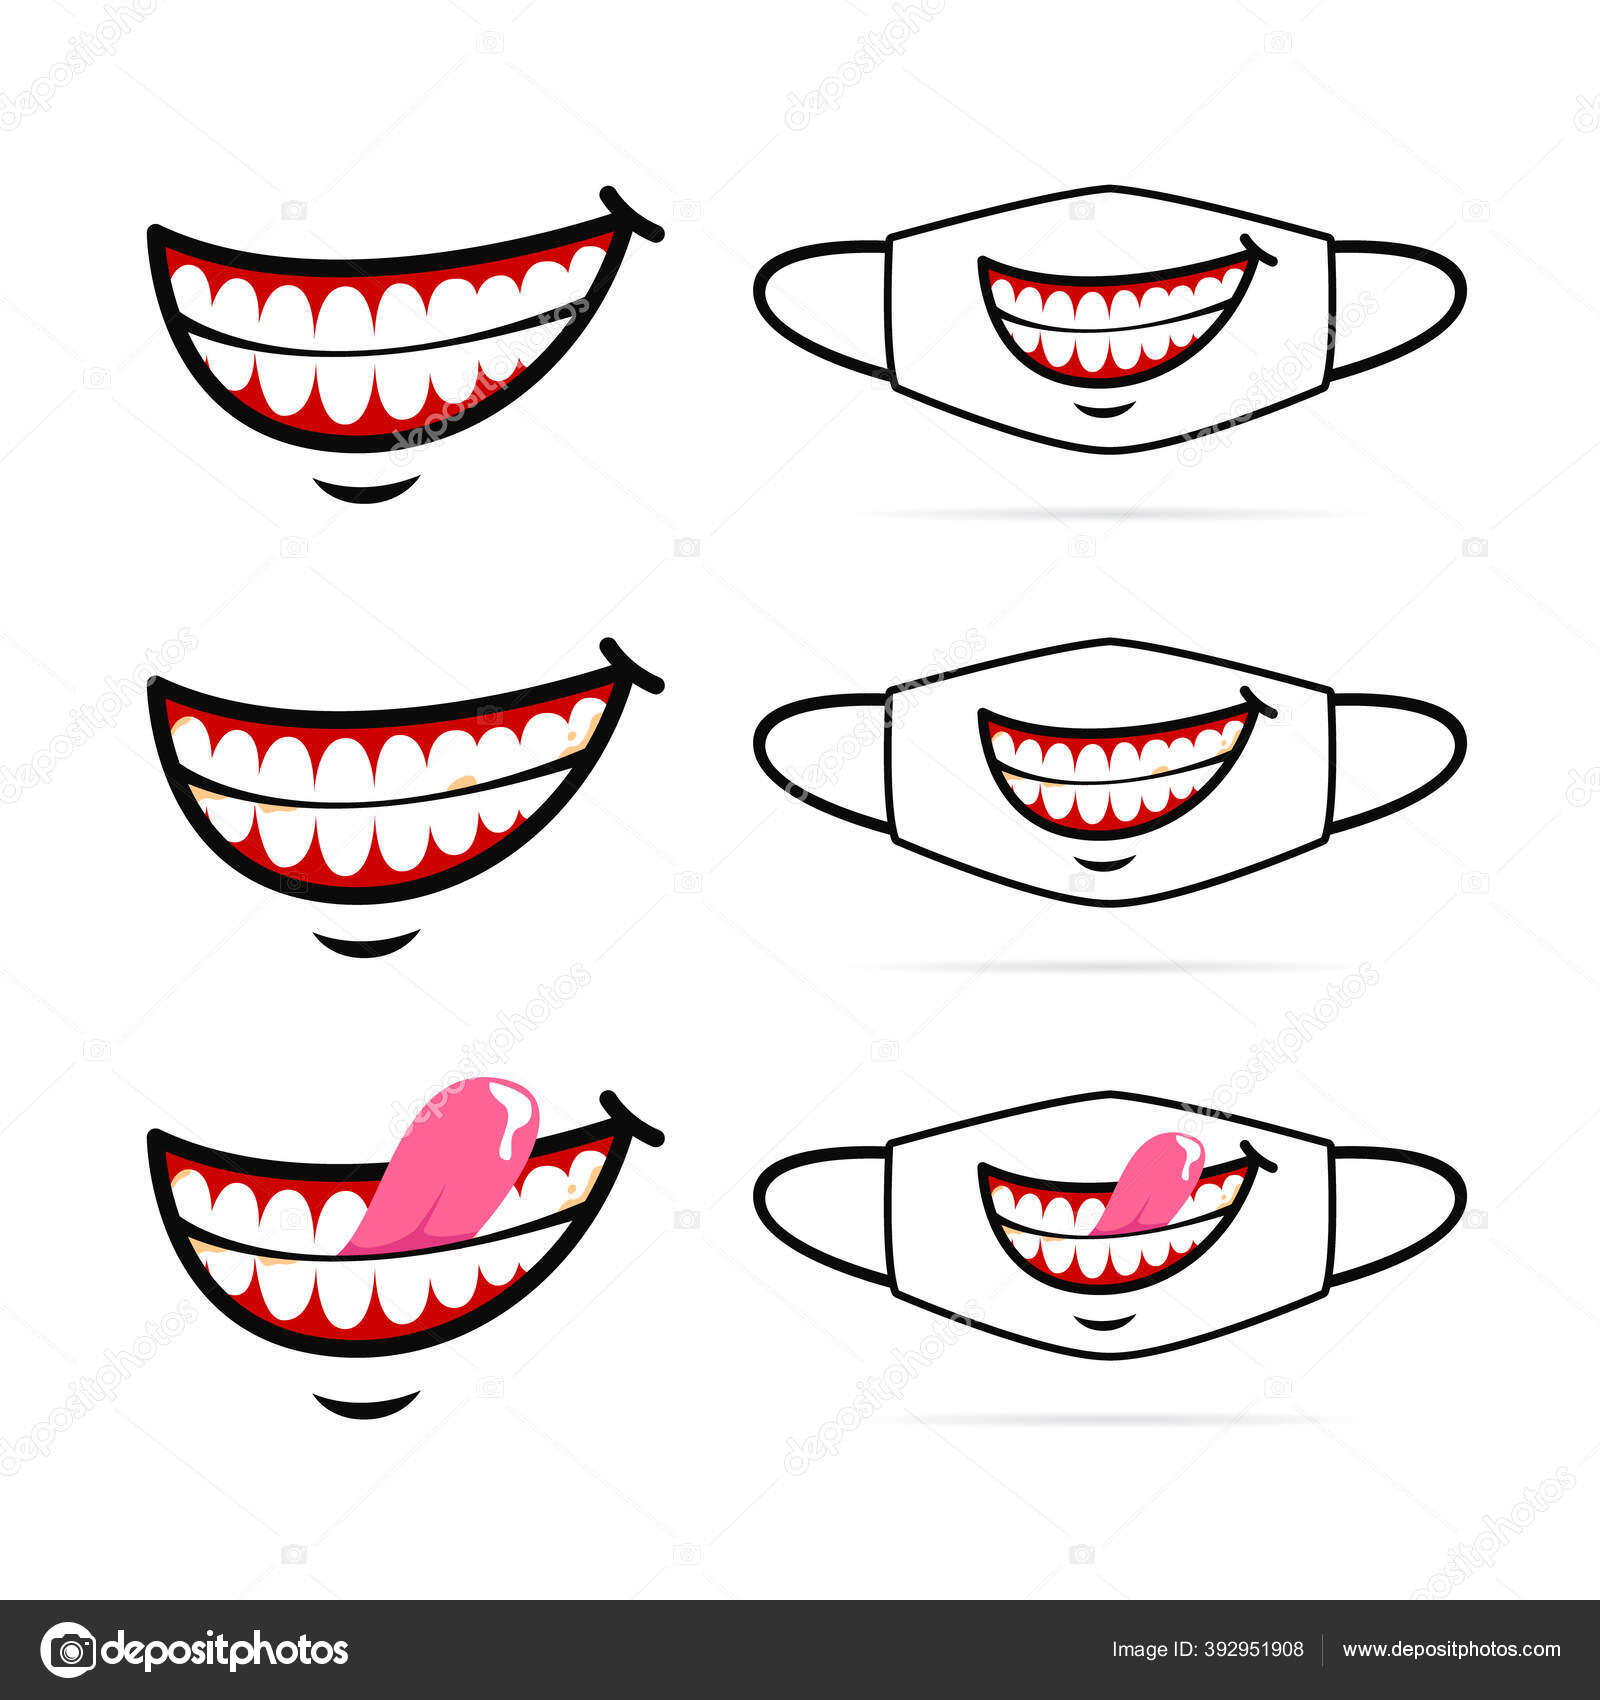 Funny Evil Smile Show Teeth Cartoon Face Mask Design Set Vector Image By C Abdie Vector Stock